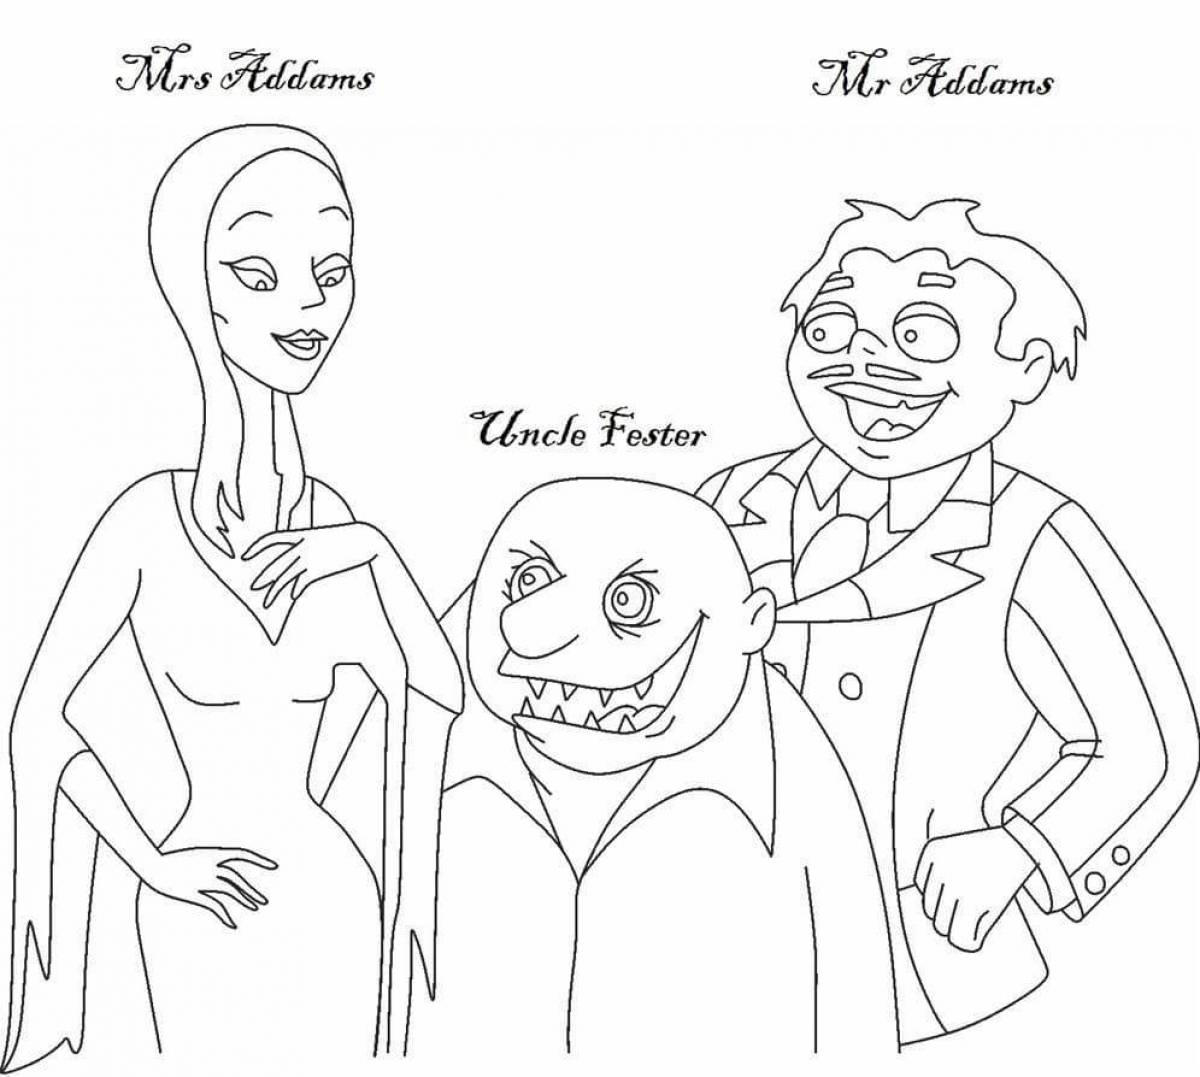 Rough Addams Family coloring book